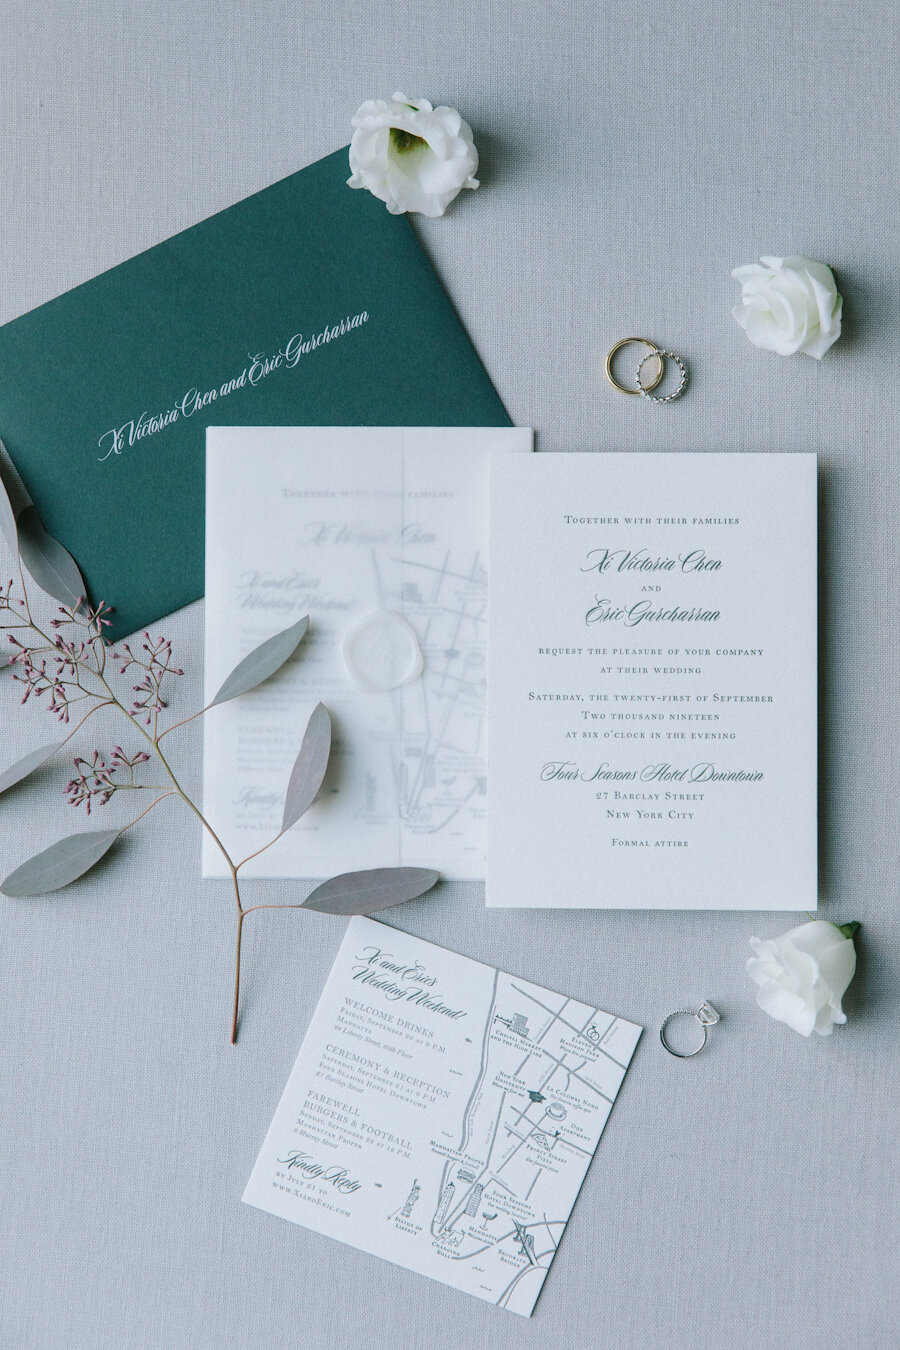 Four Seasons NYC wedding invitations letterpress with green envelope